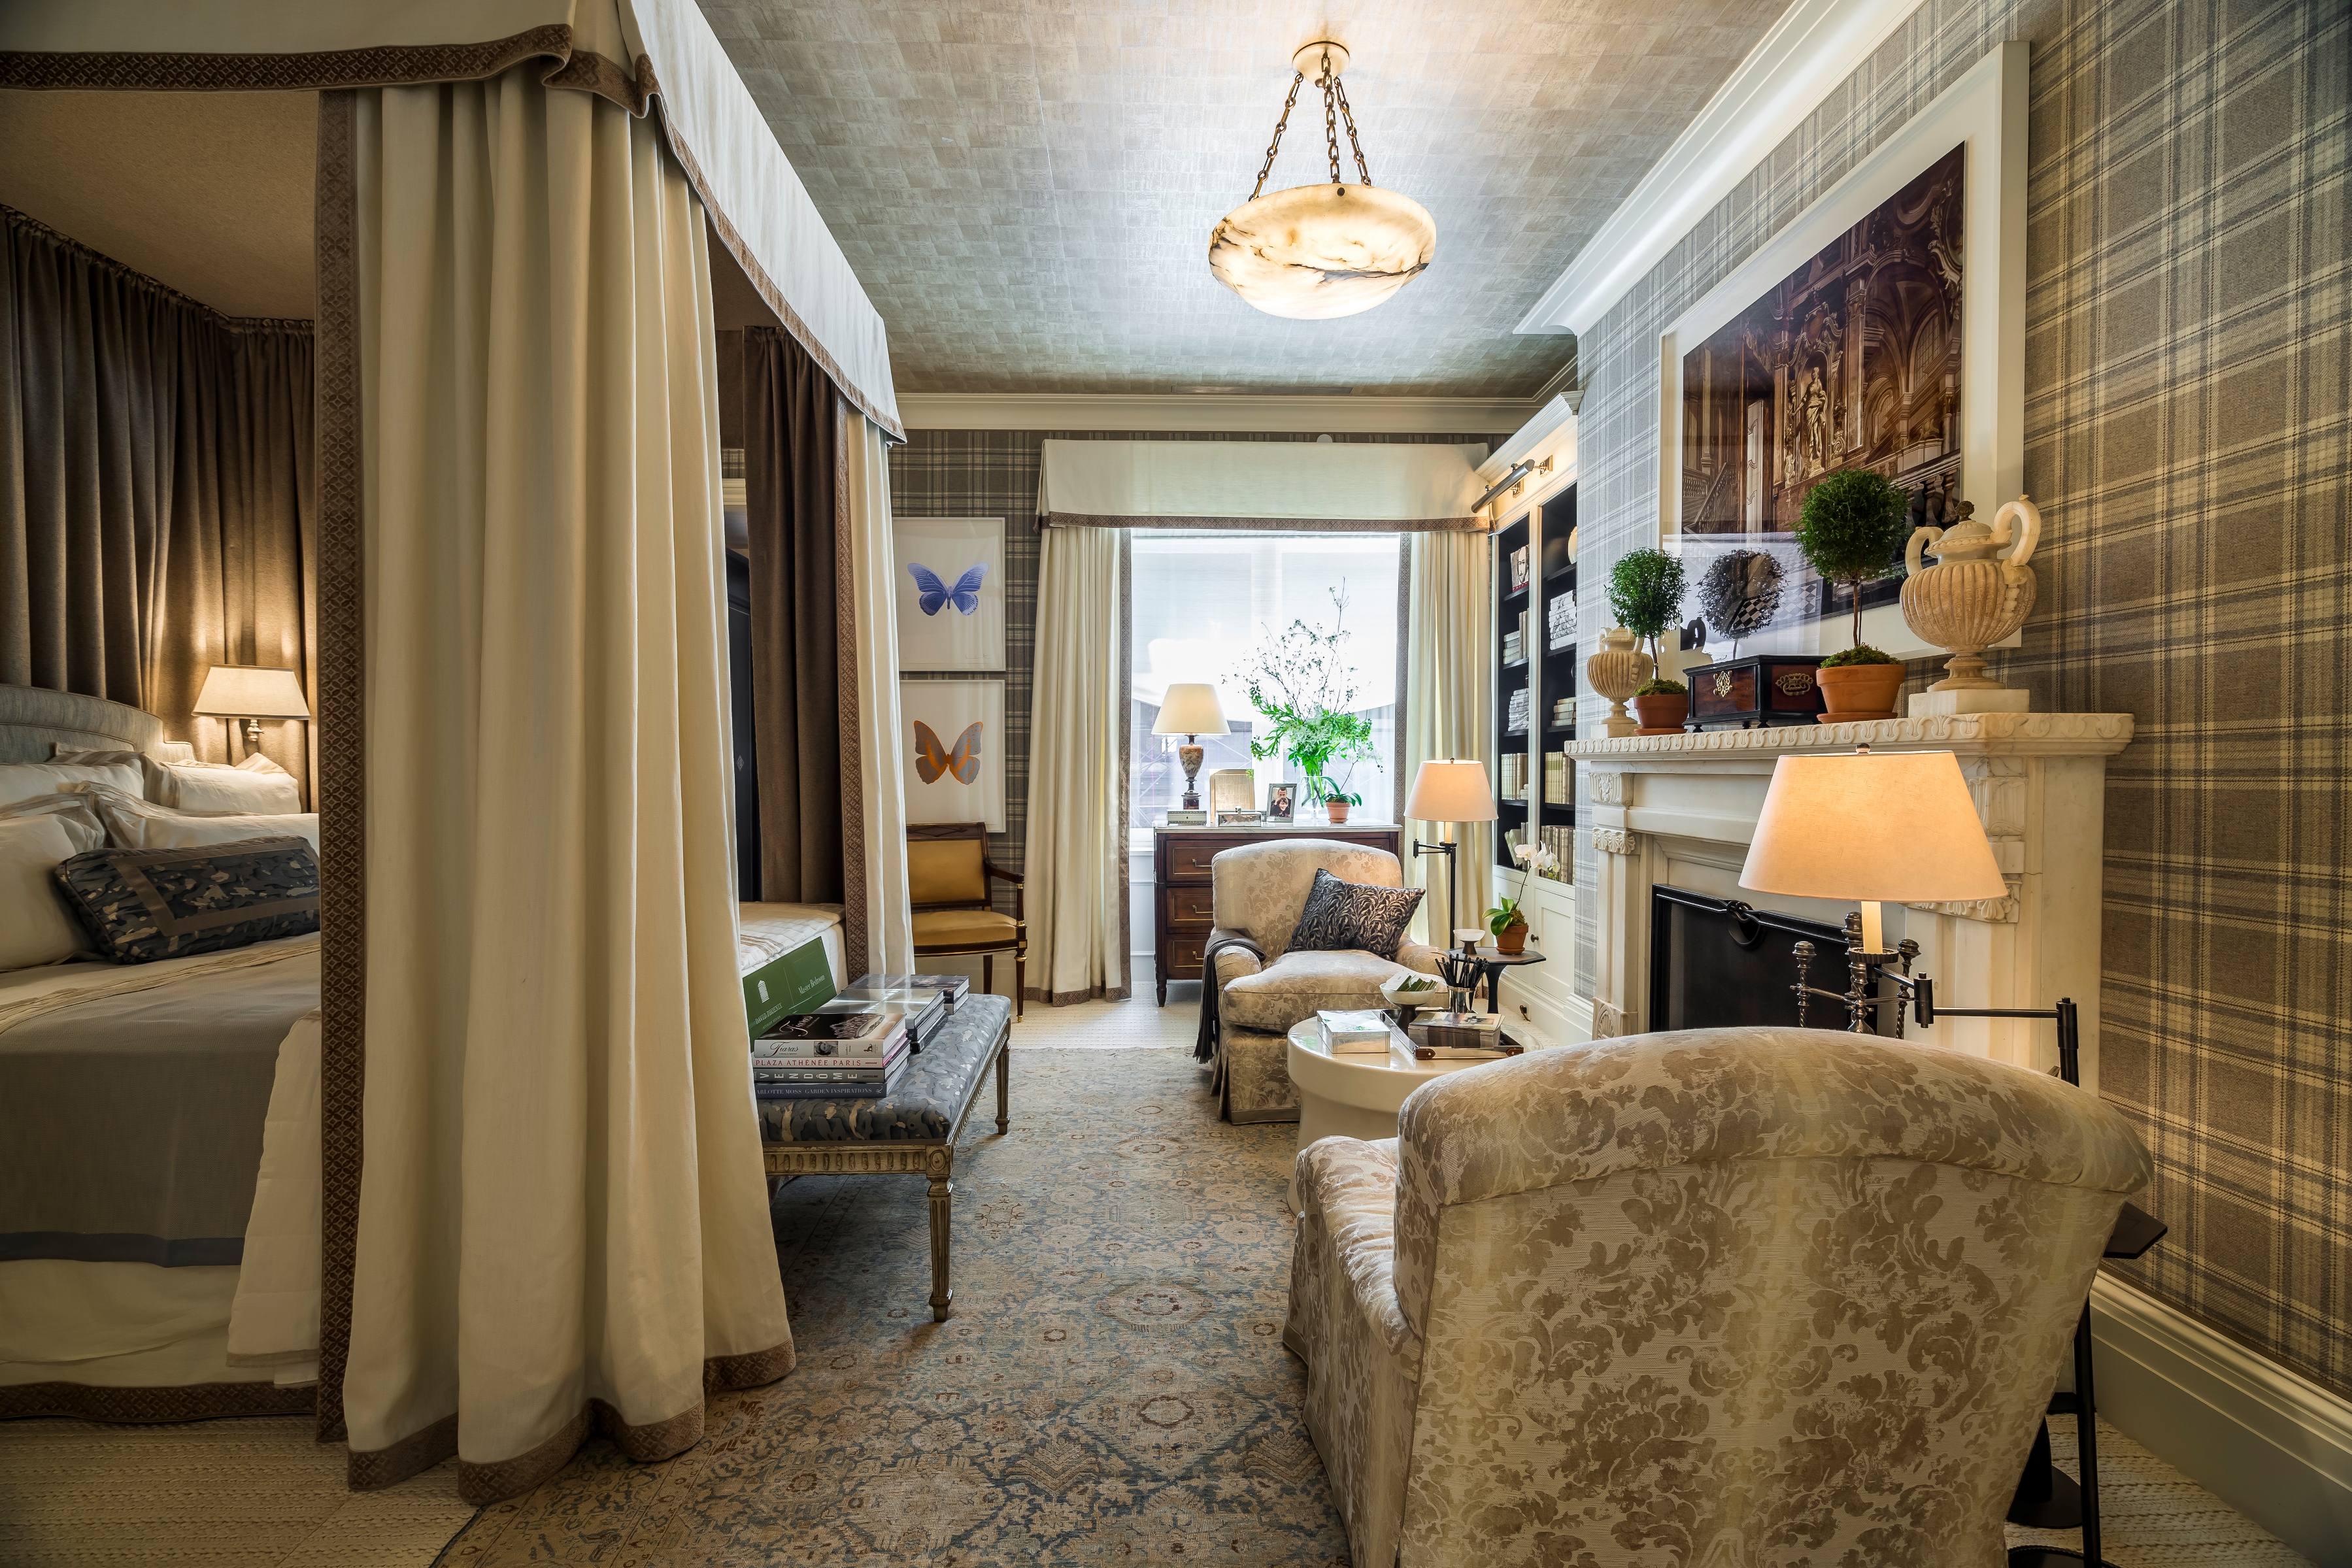 The Kips Bay Decorator Show House Opens To The Public by Brittany Good